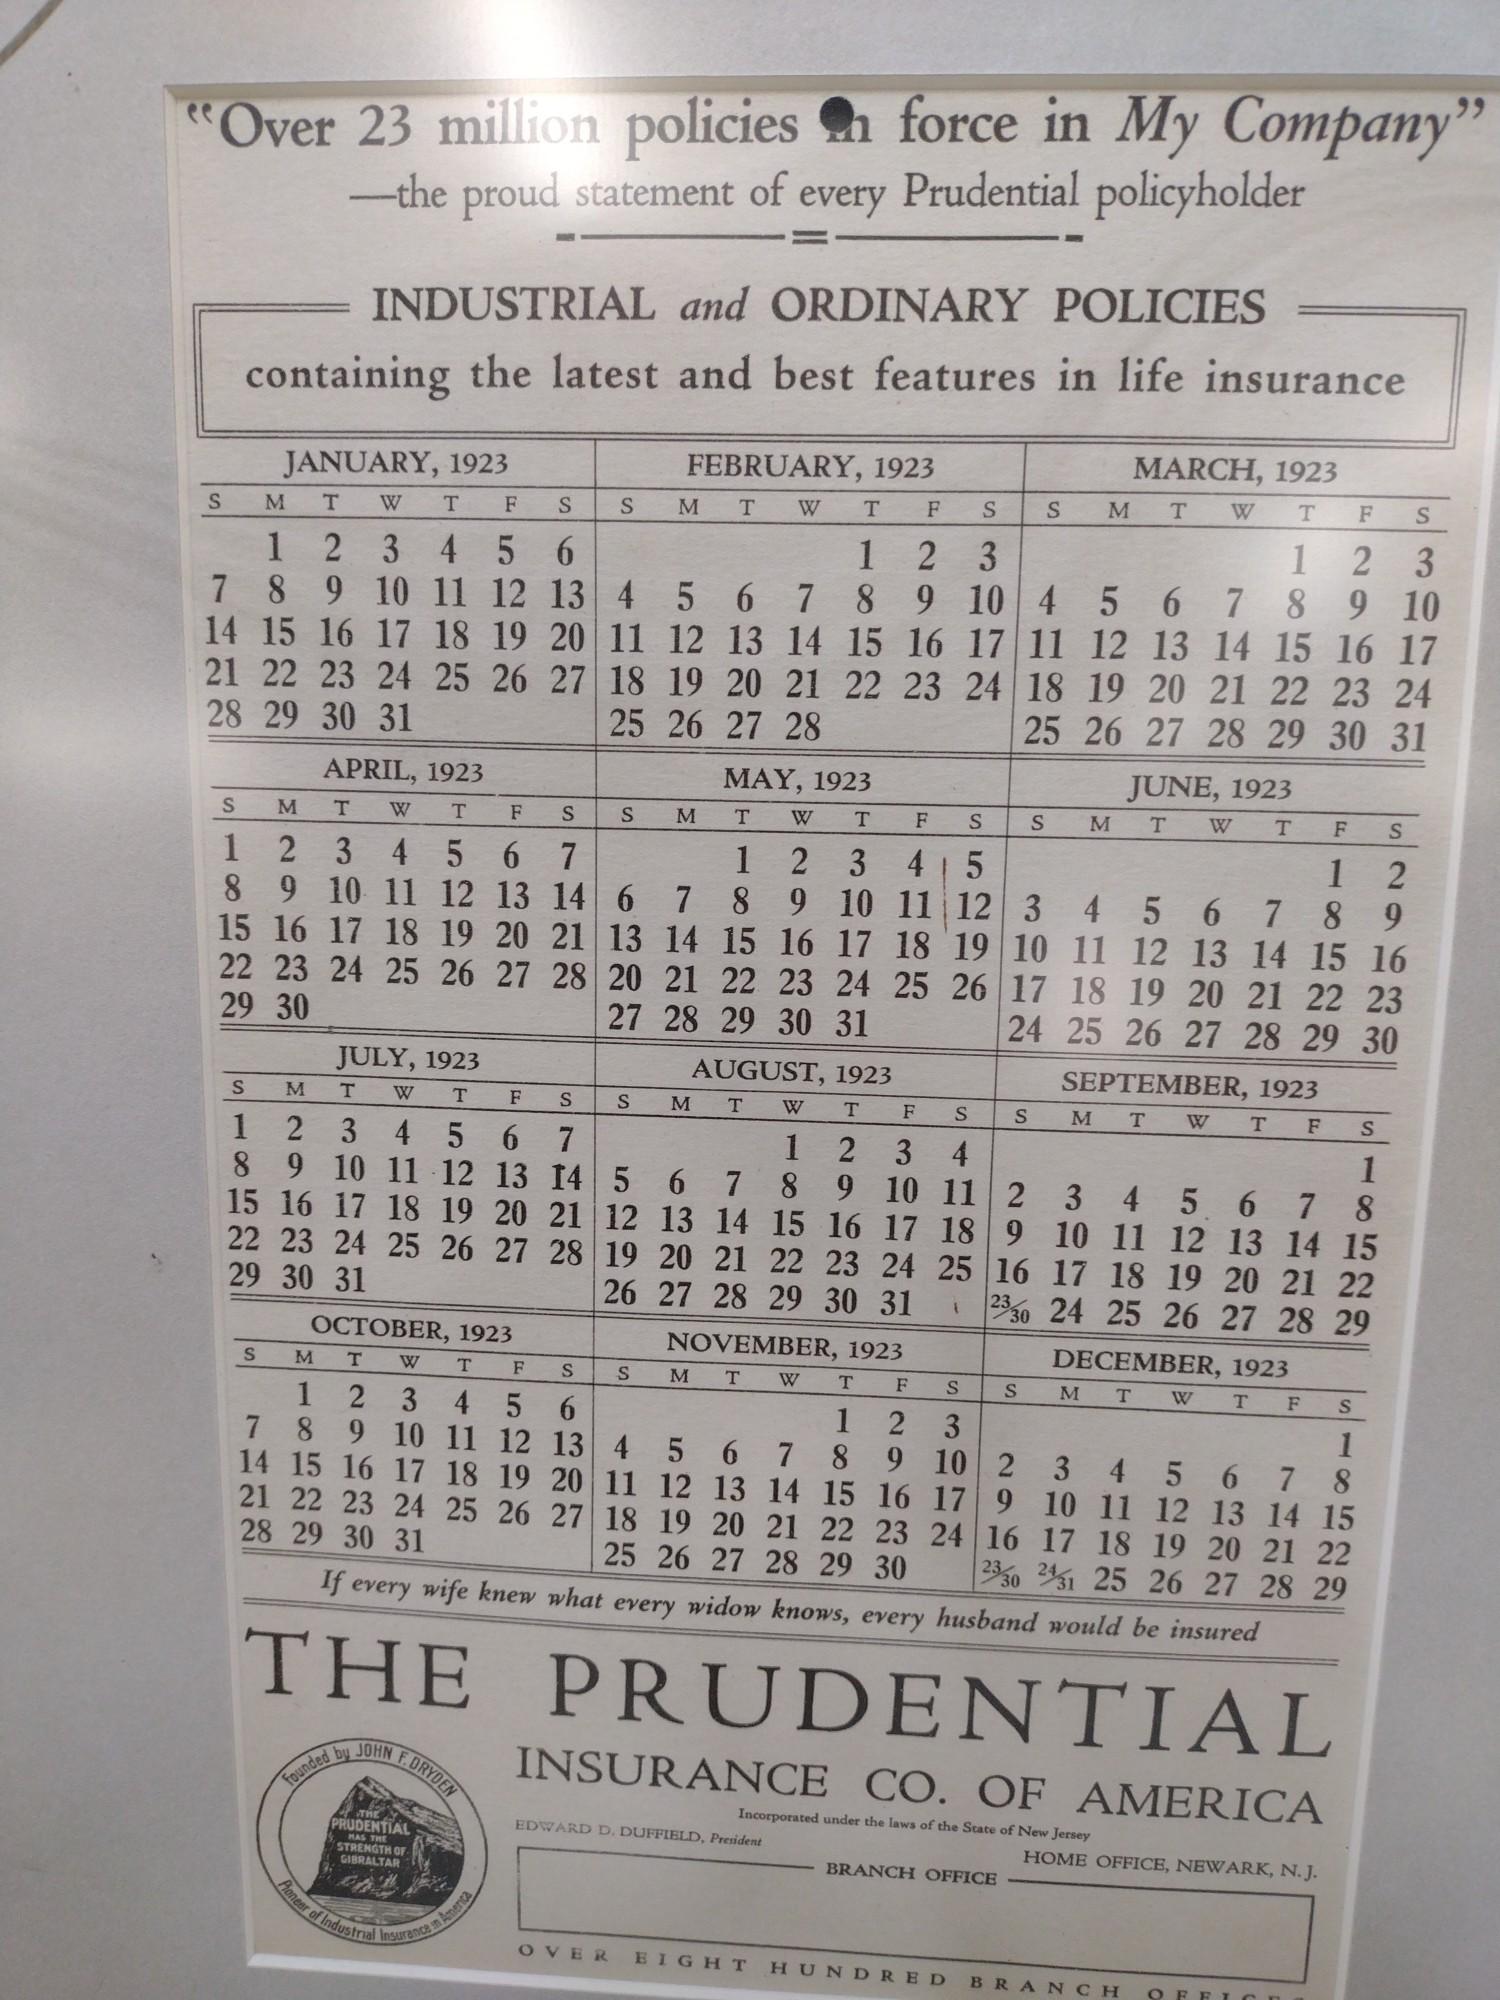 3 Prudential Insurance Company Advertising Calendar Prints by W. Haskell Coffin